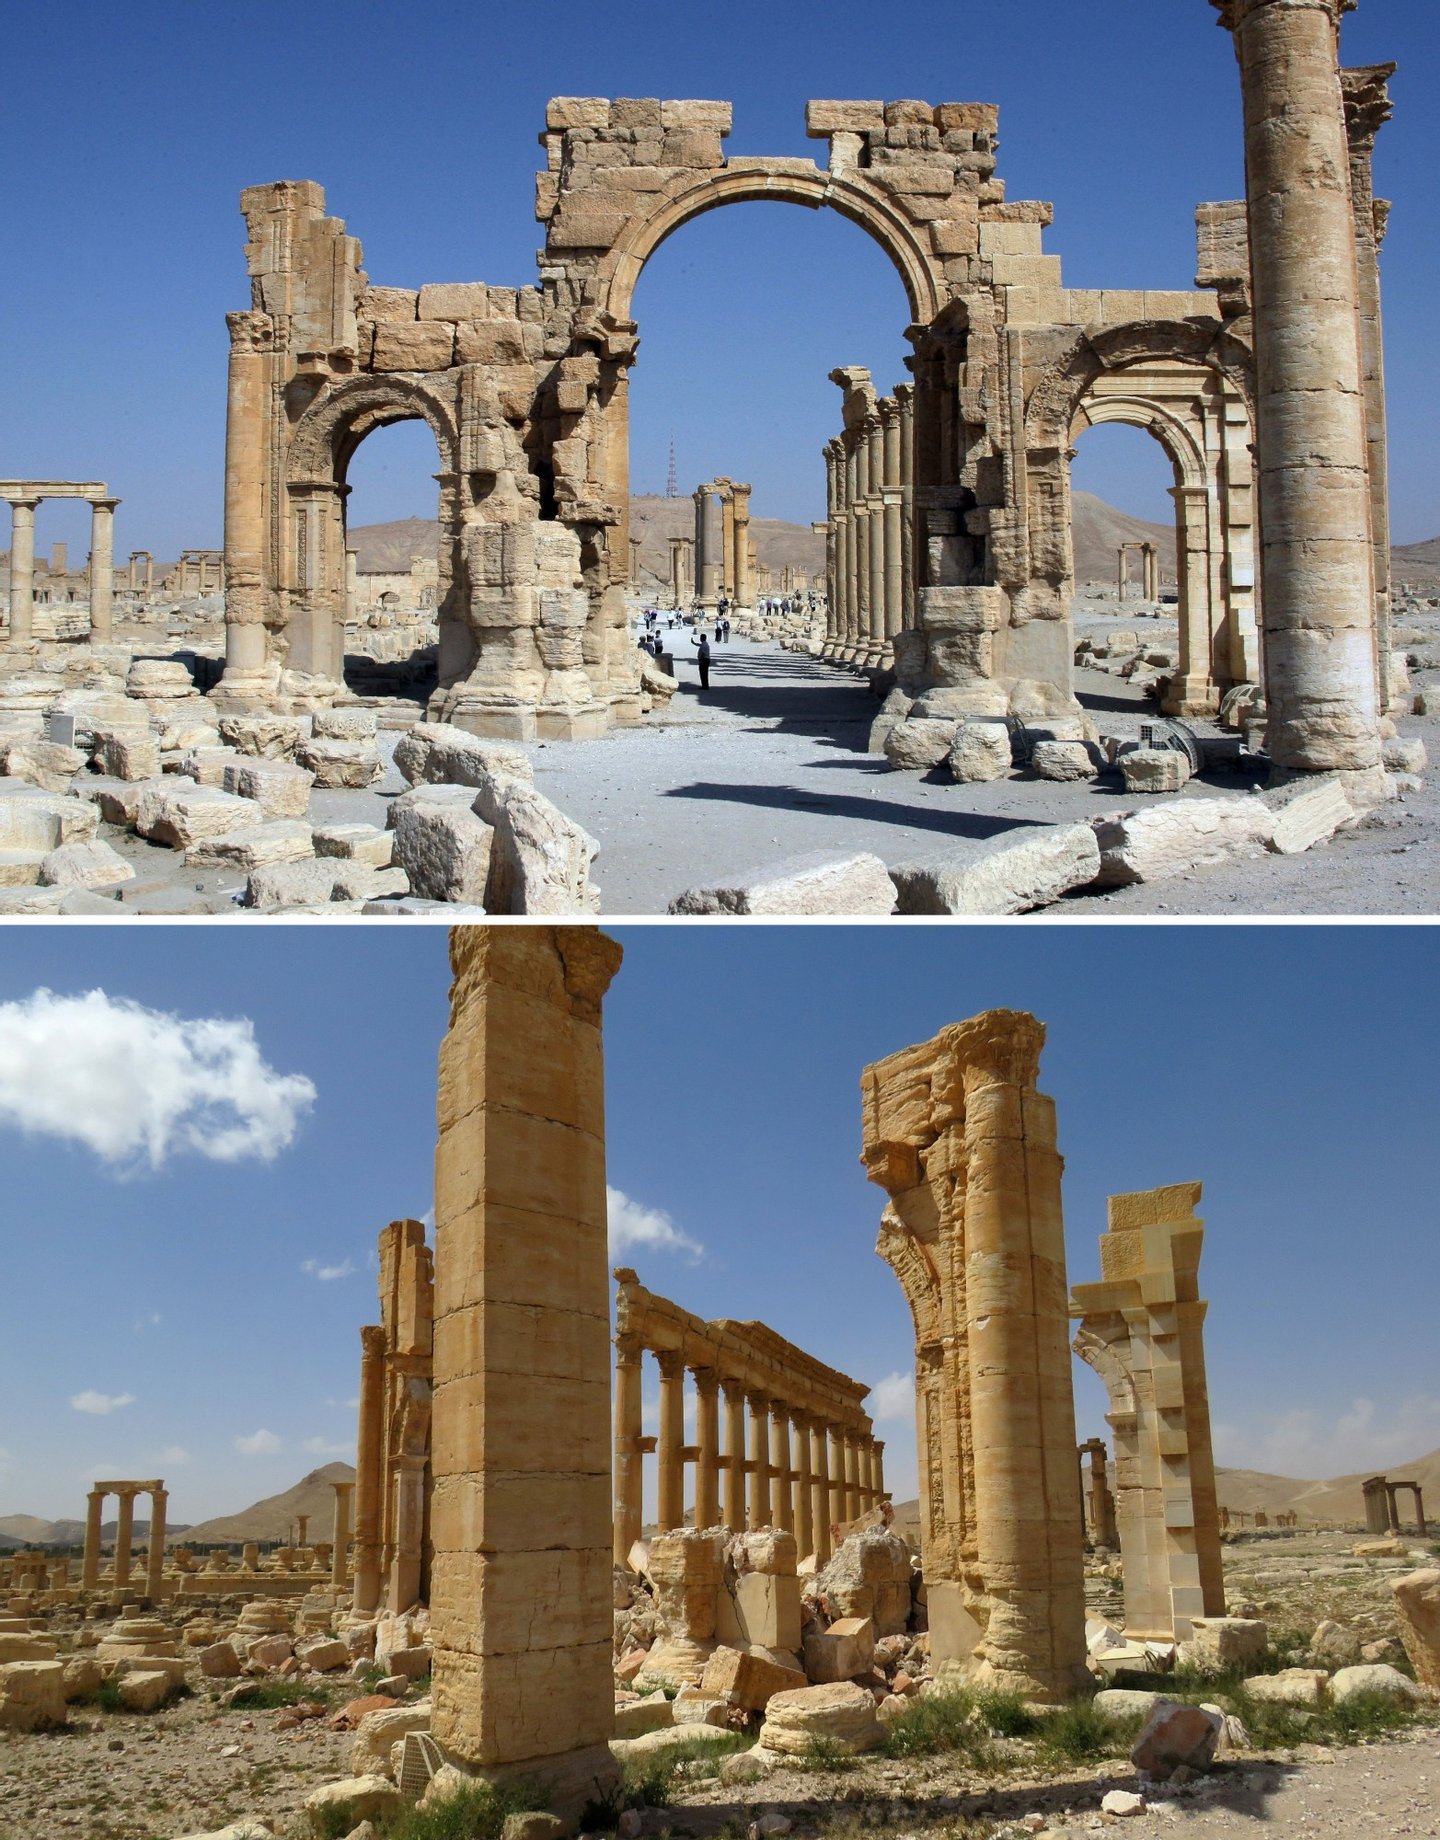 A combination of images shows a general view (top) taken on June 19, 2010 of the Arc de Troimphe (Triumph's Arc) prior to being destroyed by Islamic State (IS) group jihadists in October 2015 and the remains of the iconic structure after government troops recaptured the ancient city of Palmyra from IS fighters on March 27, 2016. Archaeologists were rushing to the ancient city of Palmyra on March 27, 2016 to assess the damage wreaked by the Islamic State group, after it was ousted by the Syrian army in a bloody battle. / AFP / LOUAI BESHARA AND STRINGER (Photo credit should read LOUAI BESHARA,STRINGER/AFP/Getty Images)